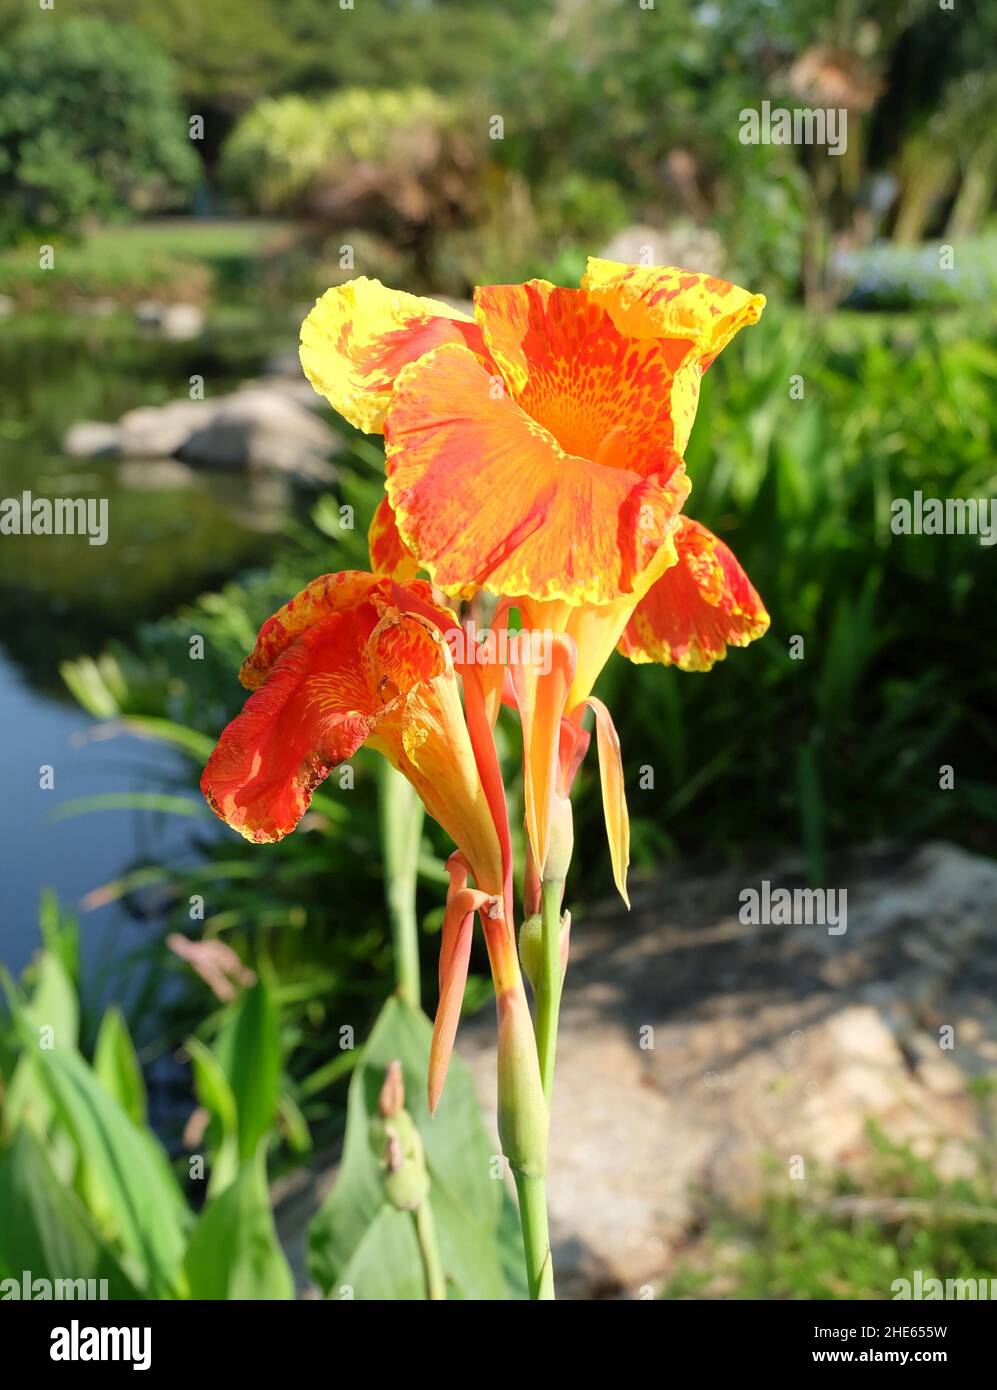 Flower and Plant, Fresh Orange Canna Lily Flowers Decoration in A Green Garden. Stock Photo